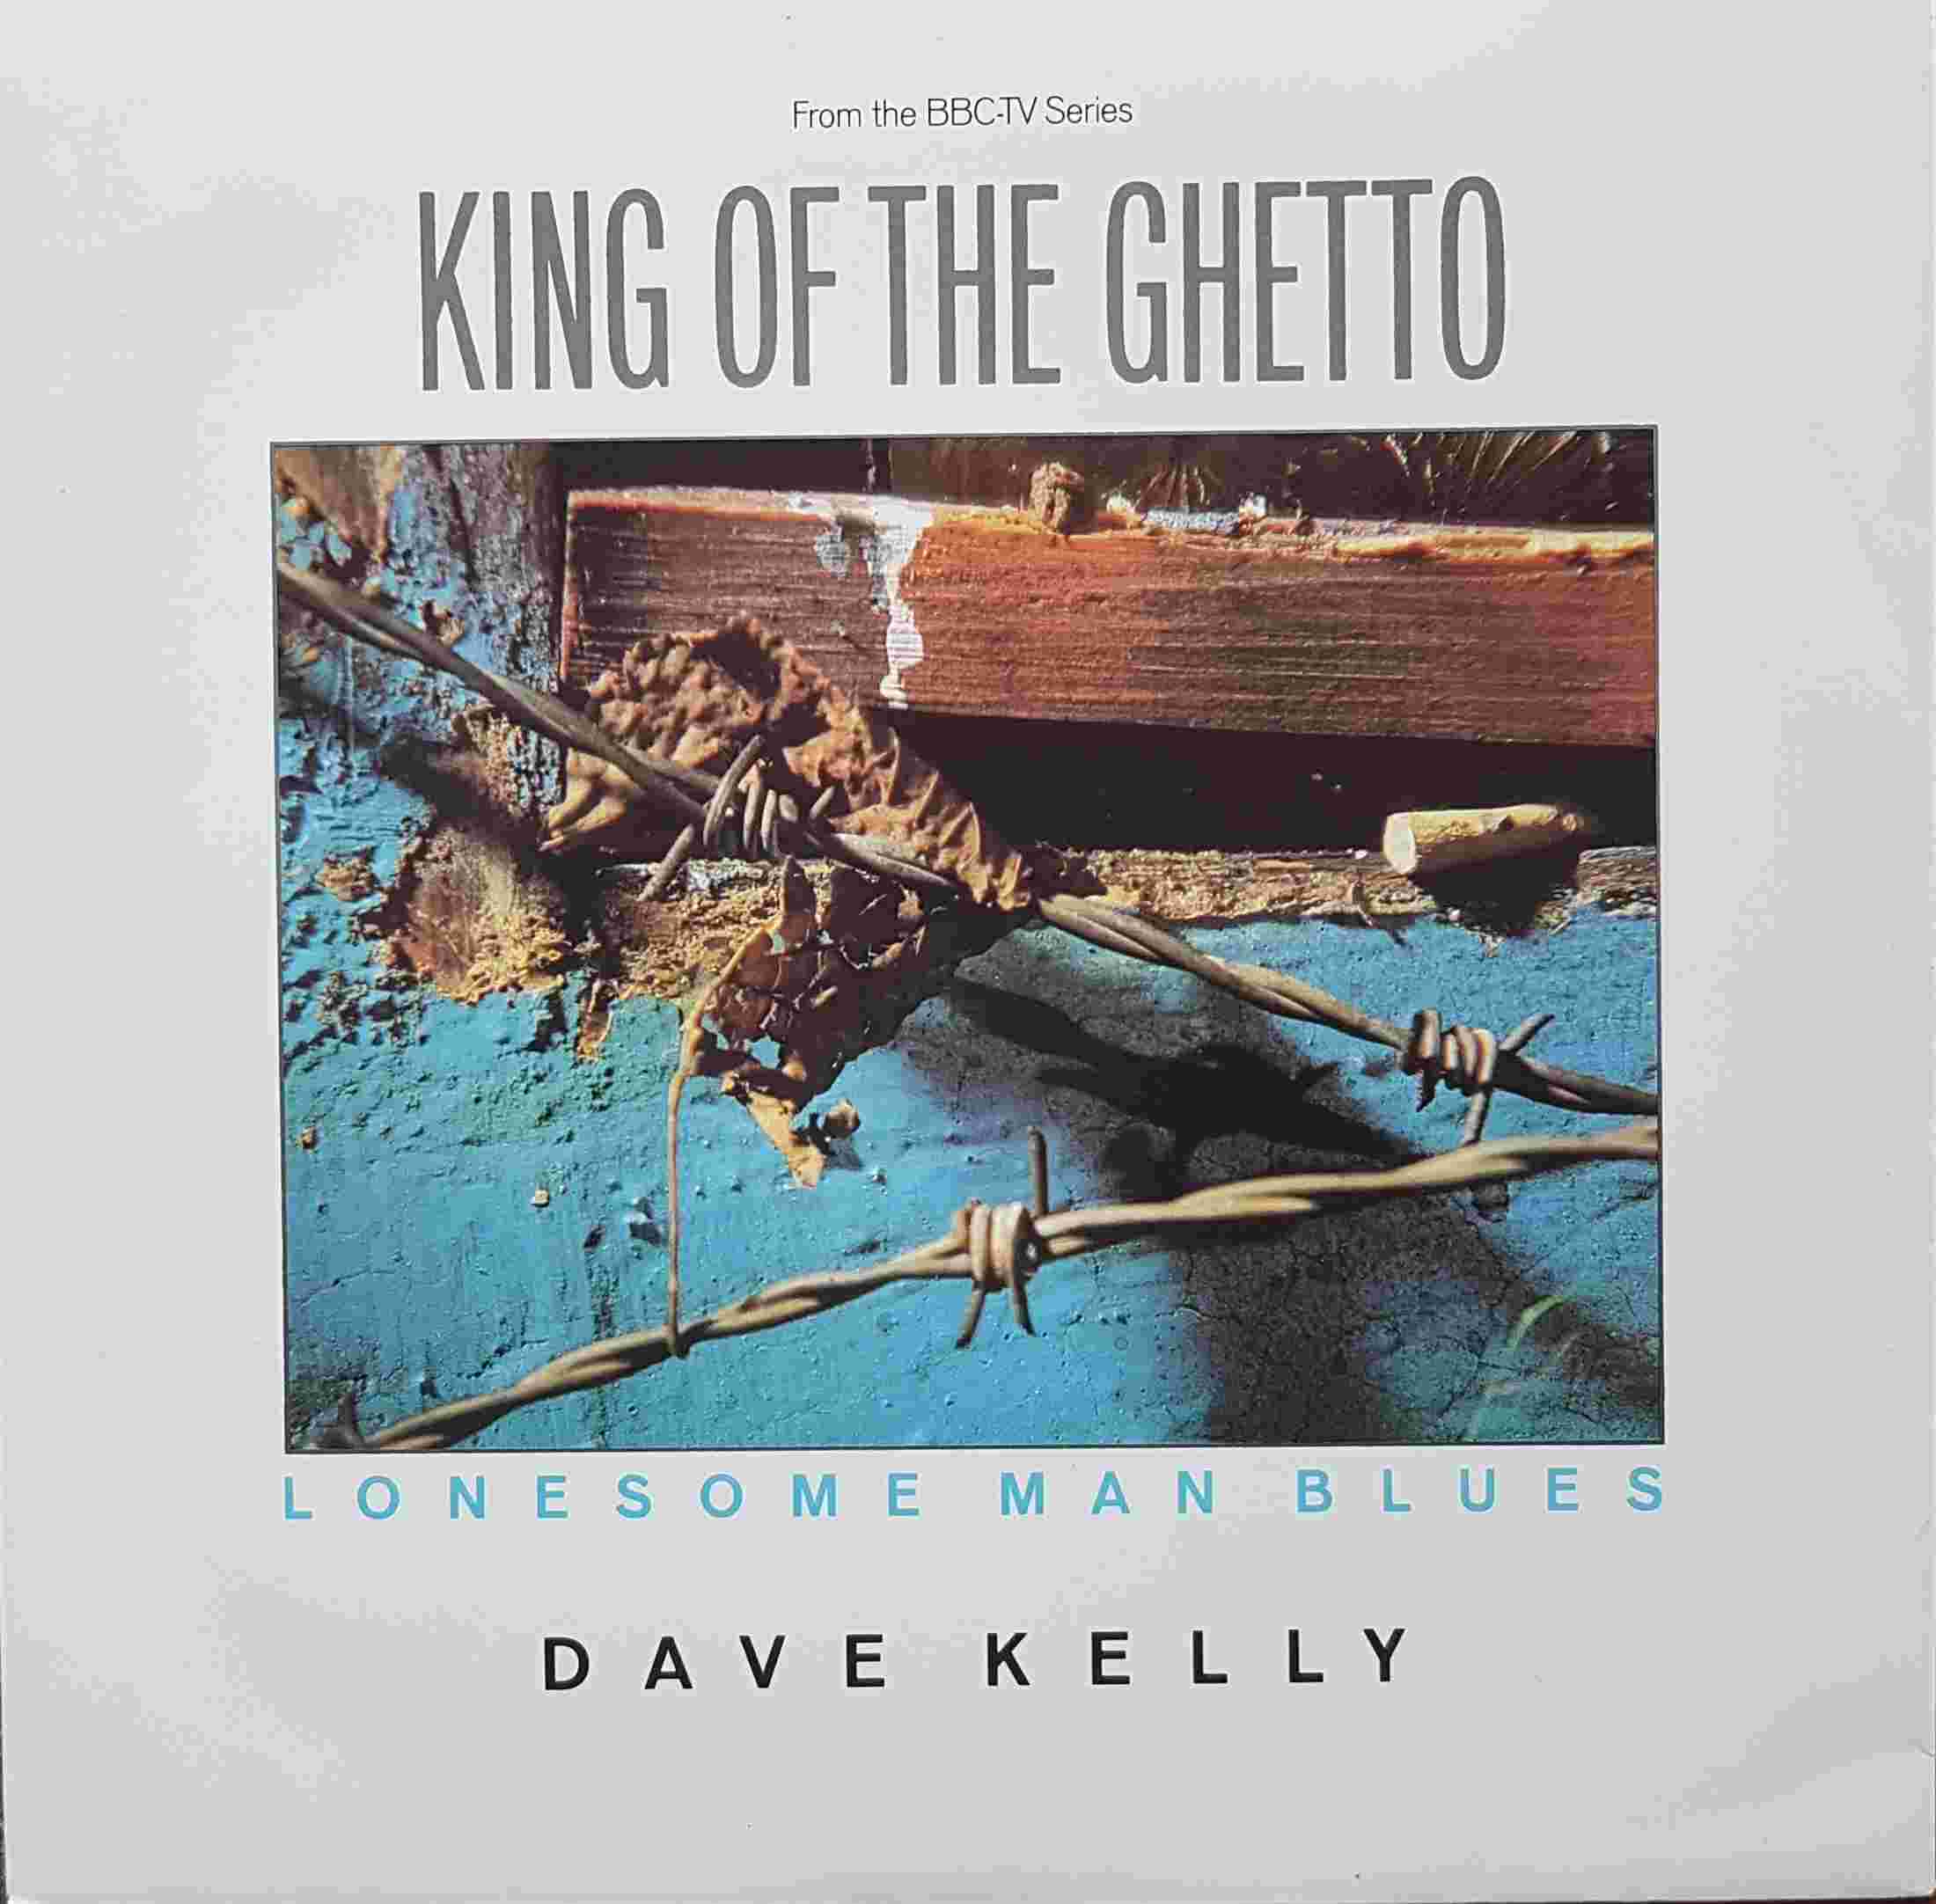 Picture of 12 RSL 188 Lonesome man blues (King of the ghetto) by artist David Kelly / Peter Filleul from the BBC 12inches - Records and Tapes library